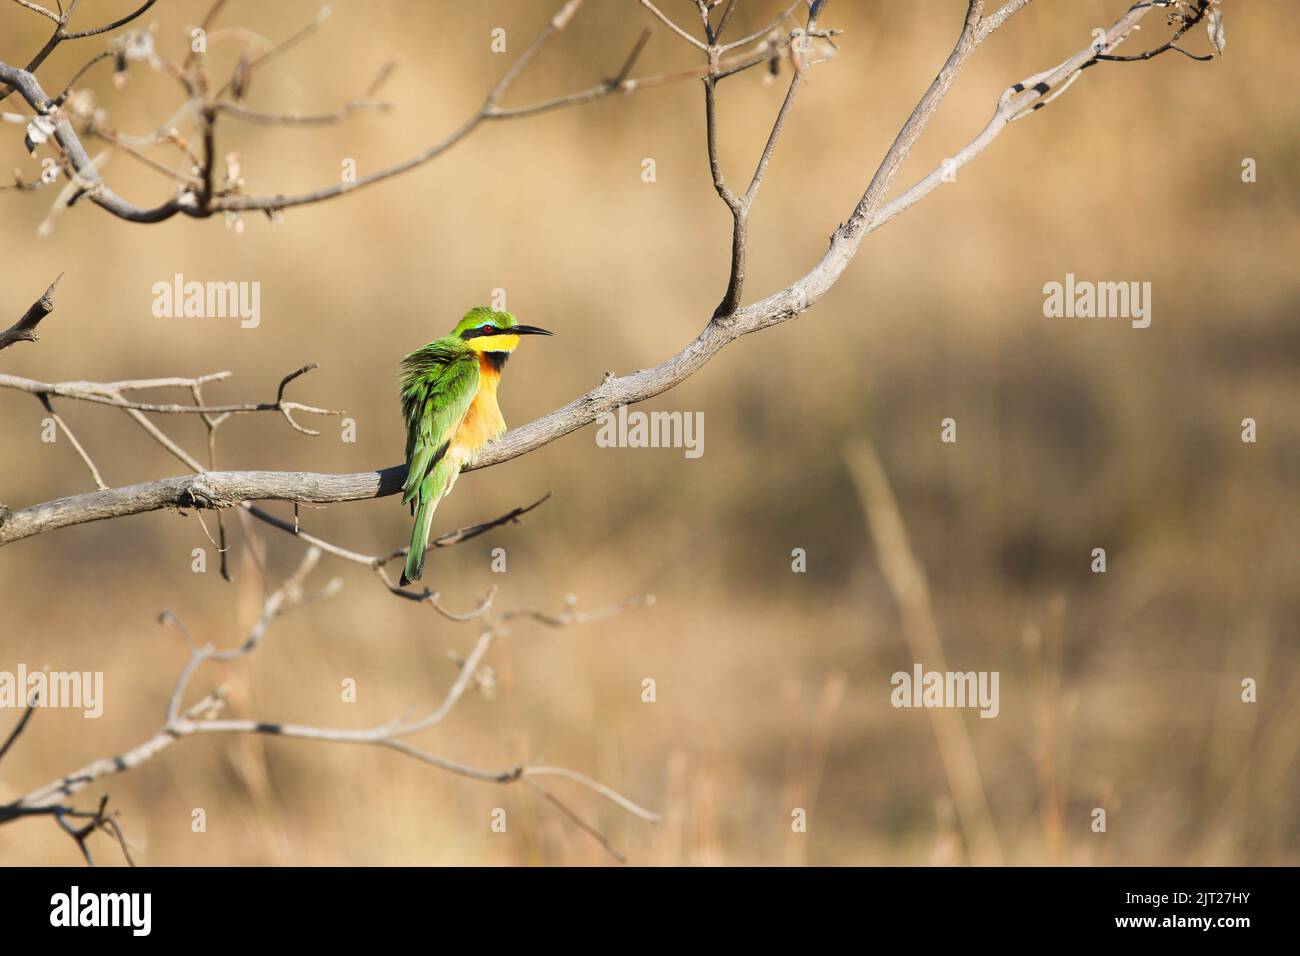 A Little Bee-Eater fluffing feathers before taking flight Stock Photo